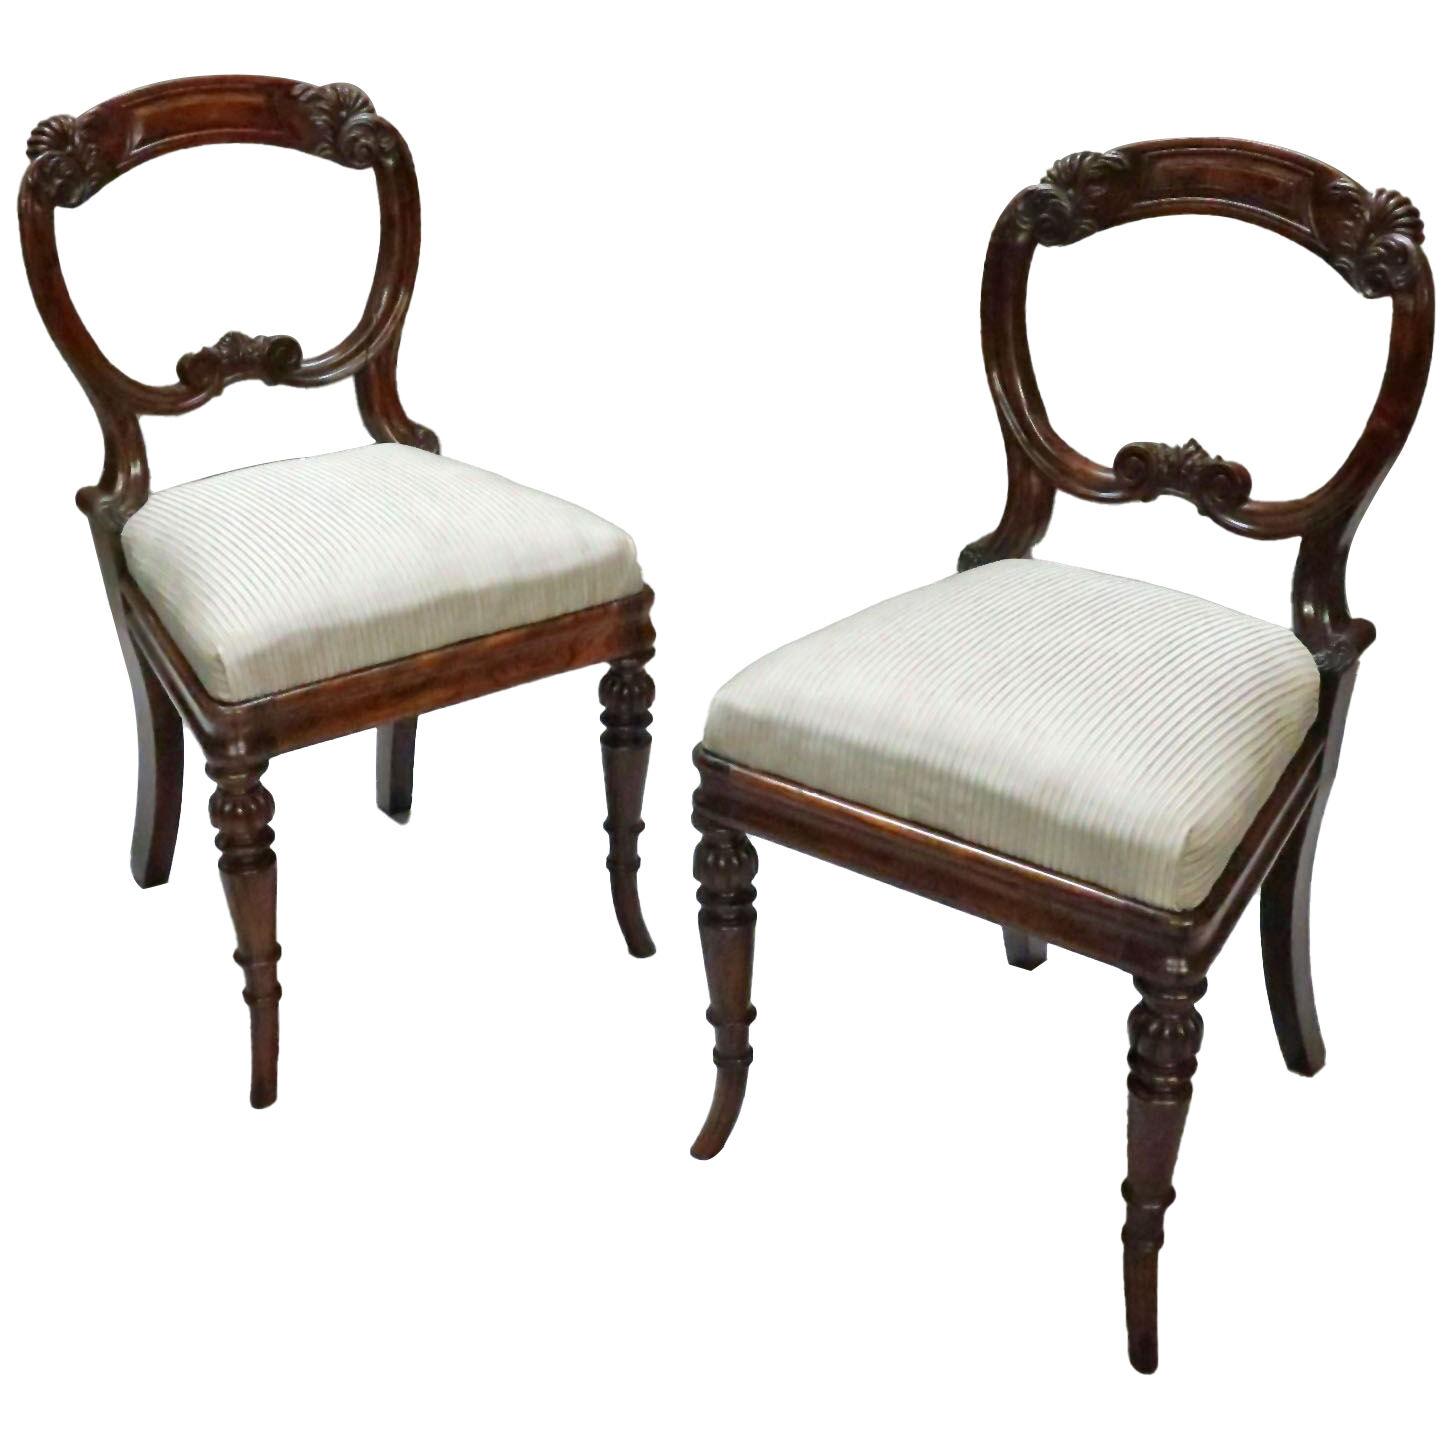 Pair of Regency Simulated Rosewood Chairs Attributed to Gillows